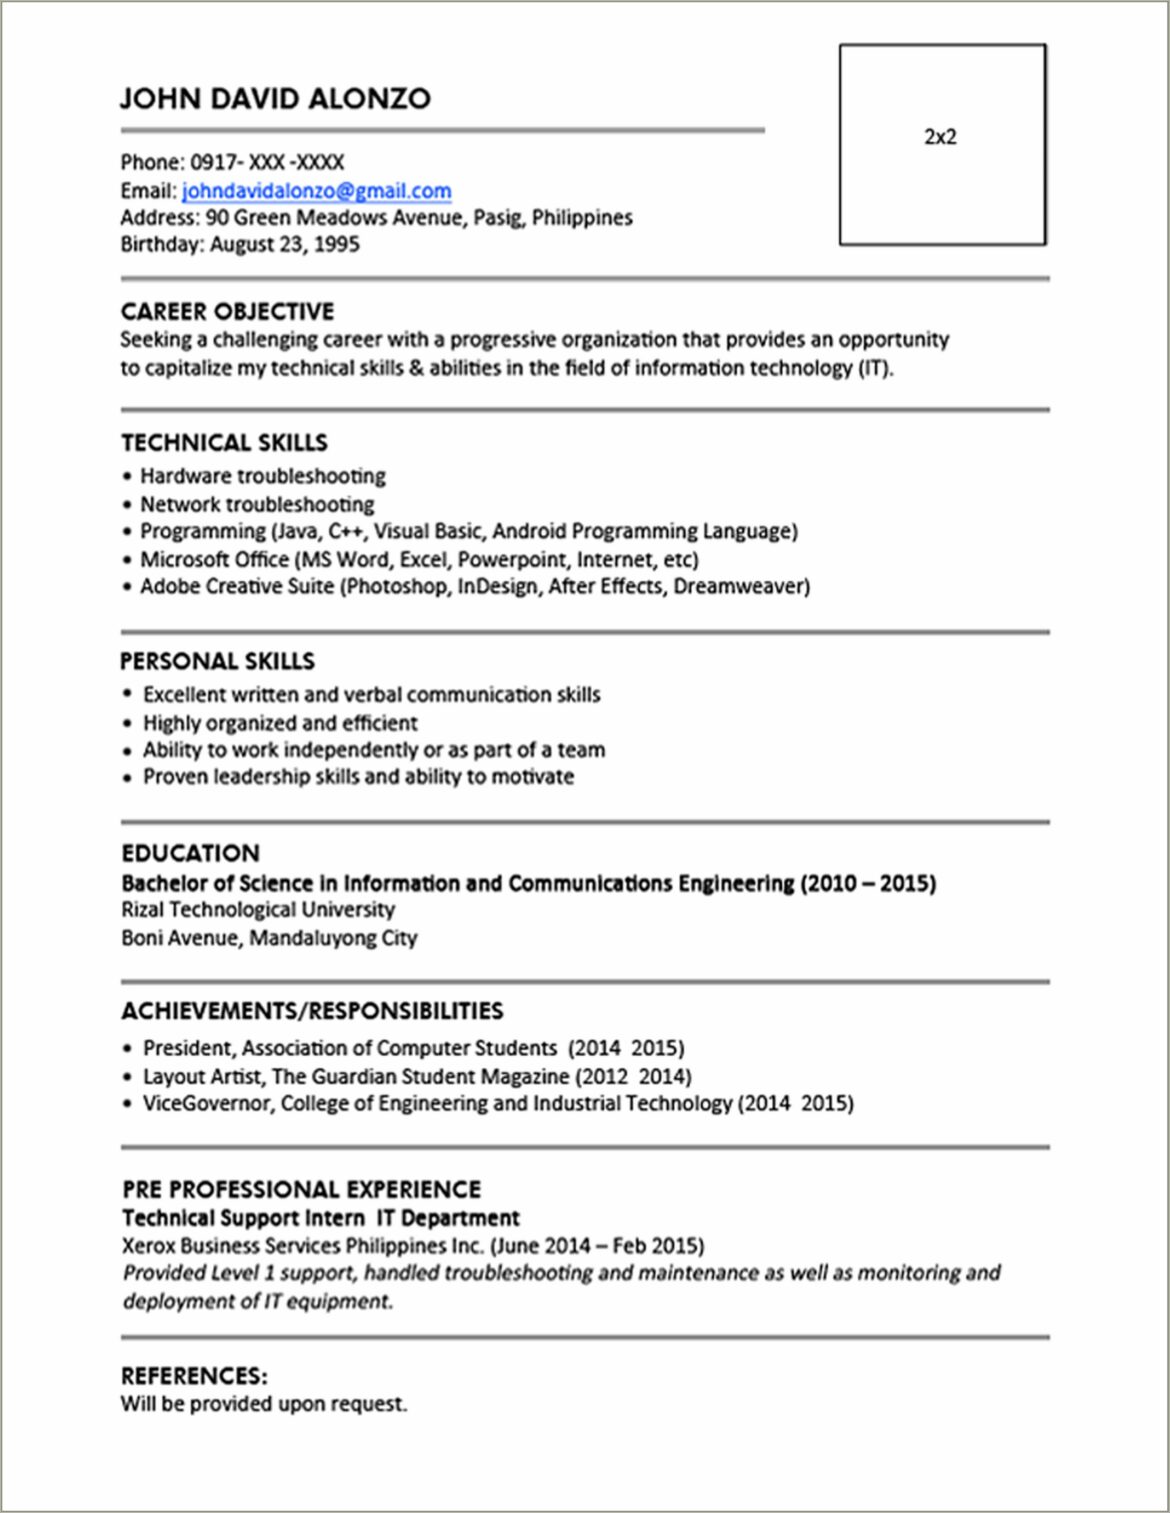 Sample Resume With Only One Job